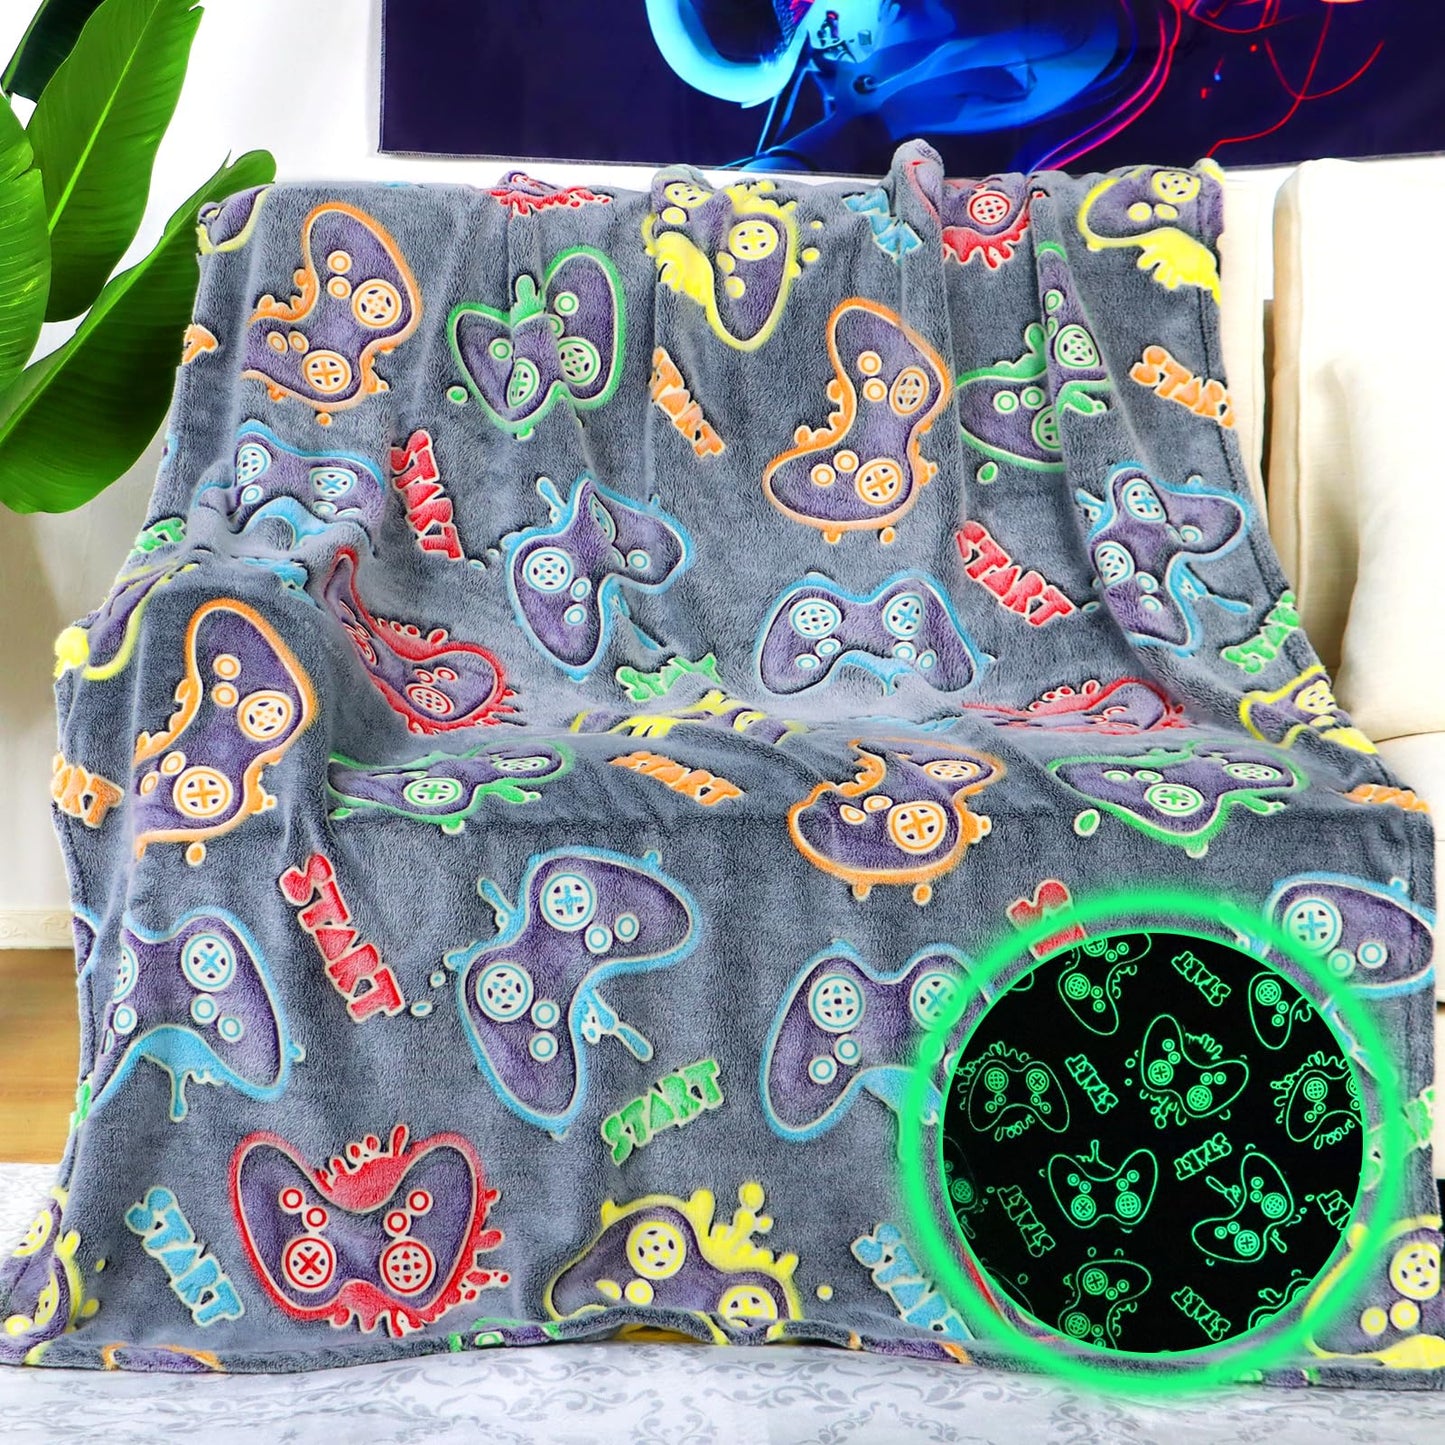 KIVEE Gaming Gifts Toys Blanket for Teen Boys Glow in The Dark Gaming Blanket for Men Boyfriends Gifts for Gamers Soft Fleece Gamer Blanket for Kids Birthday Christmas Valentines Gifts - amzGamess